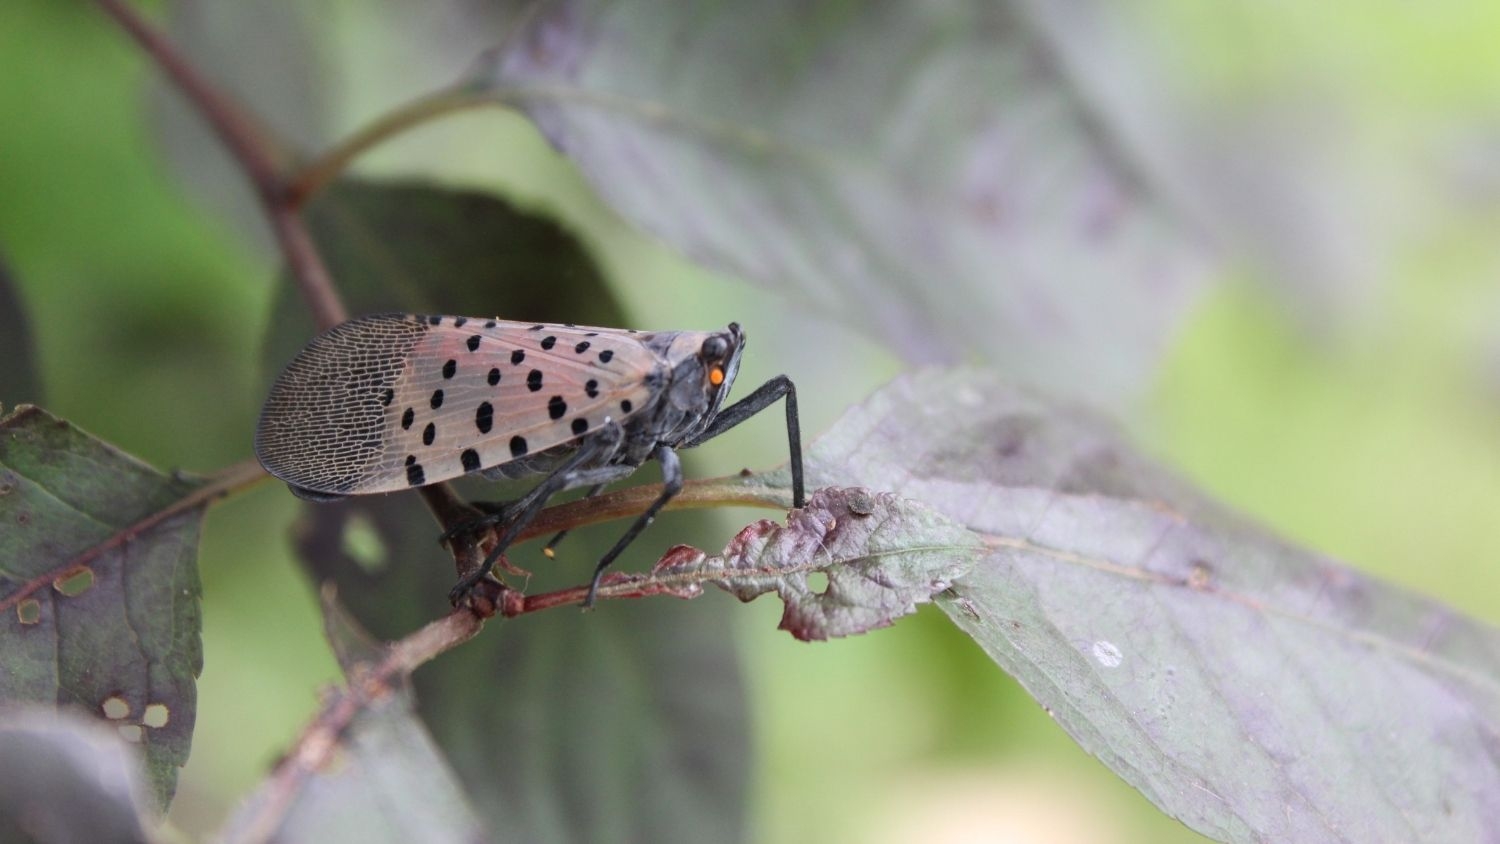 Spotted lanternfly on leaf - Ask an Expert: How Will the Spotted Lanternfly Impact North Carolina? - College of Natural Resources News NC State University